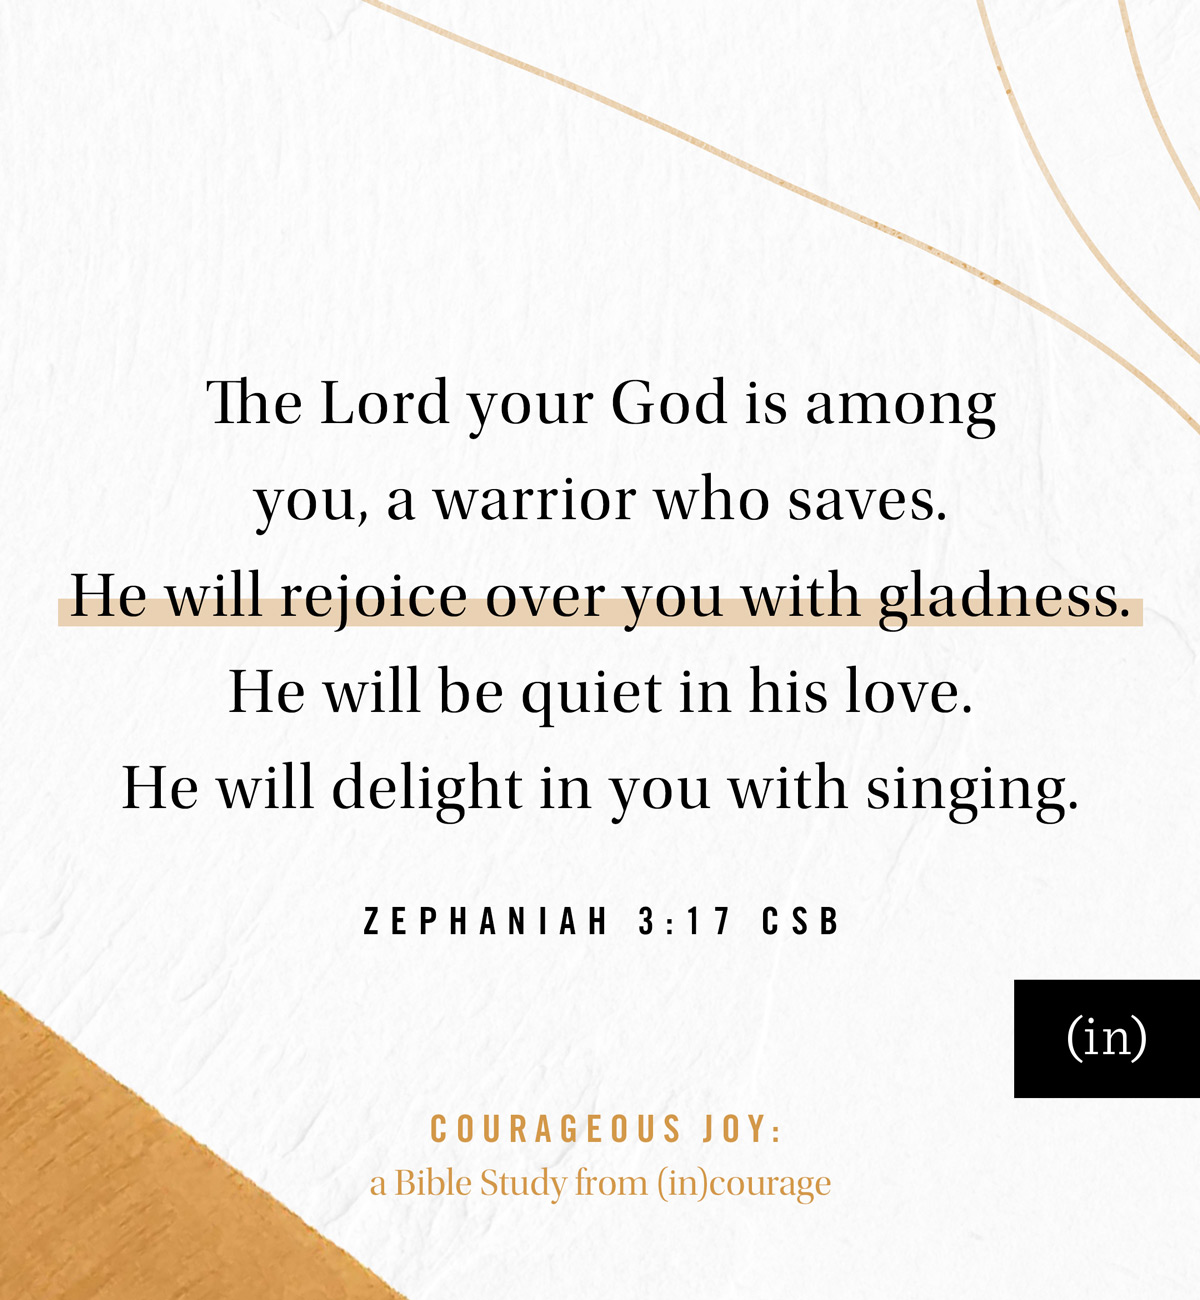 Happy Launch Day to the Courageous Joy Bible Study!